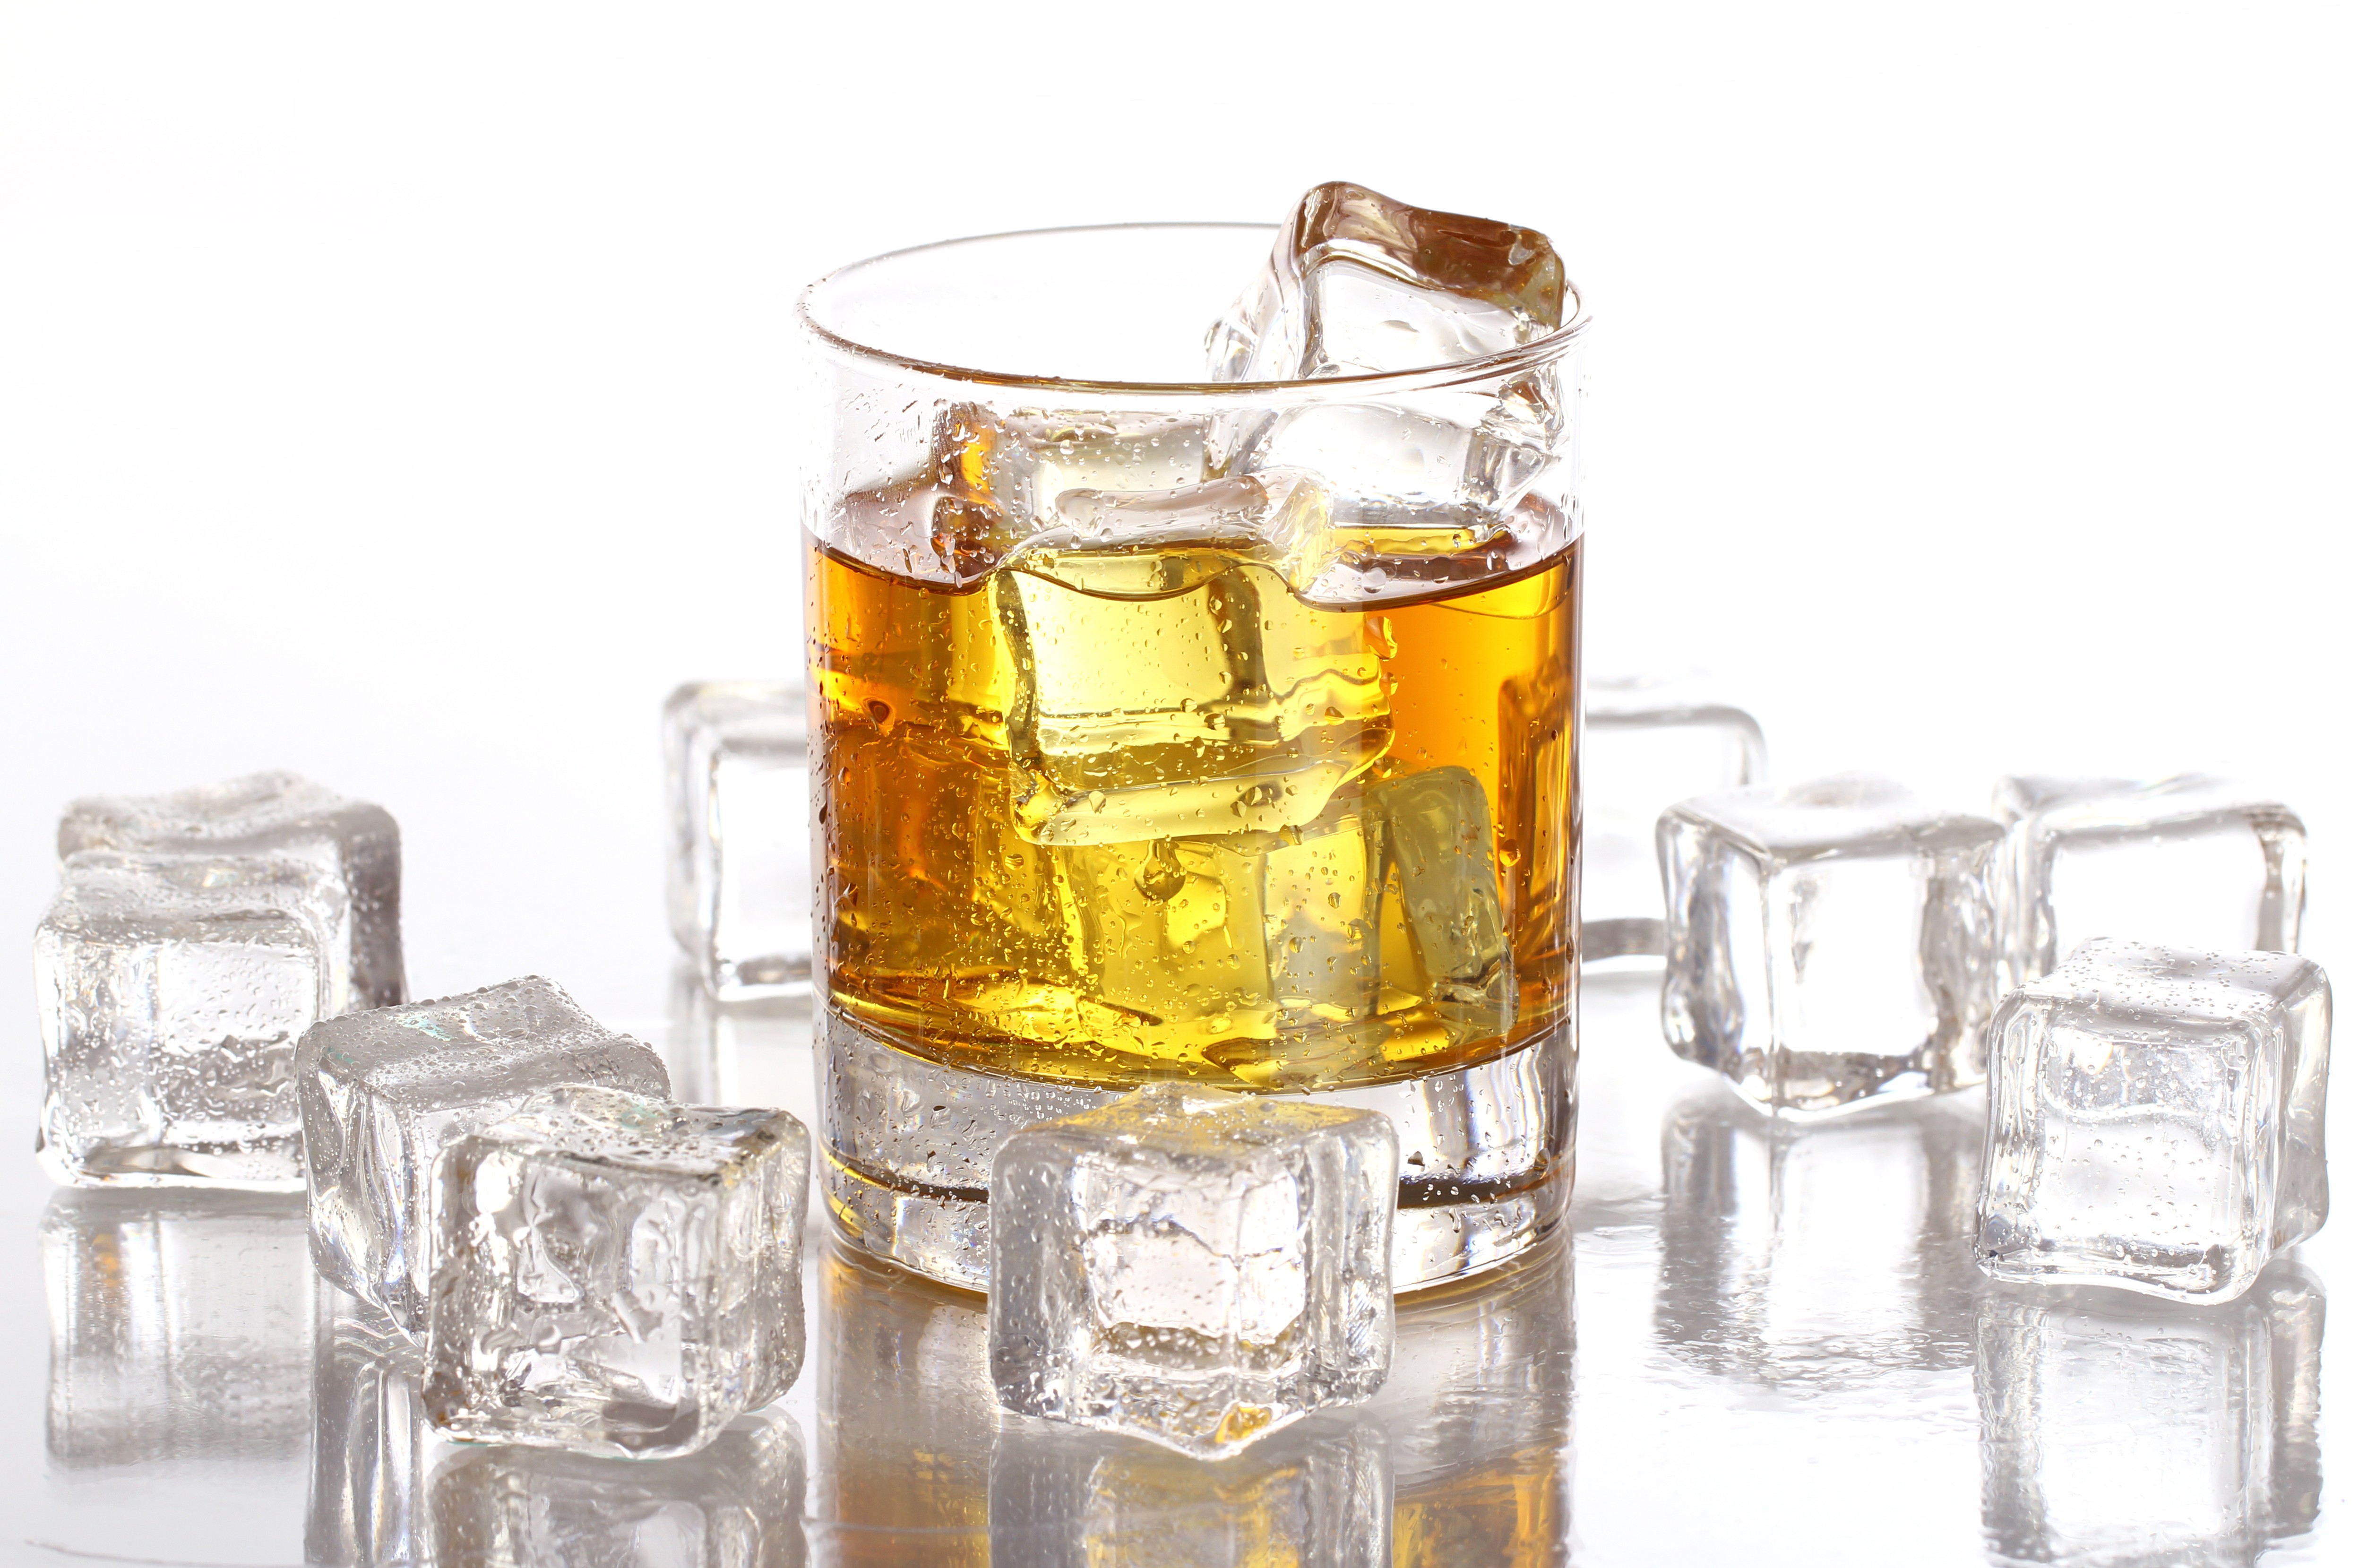 General 5028x3318 ice cubes alcohol drinking glass white background food simple background